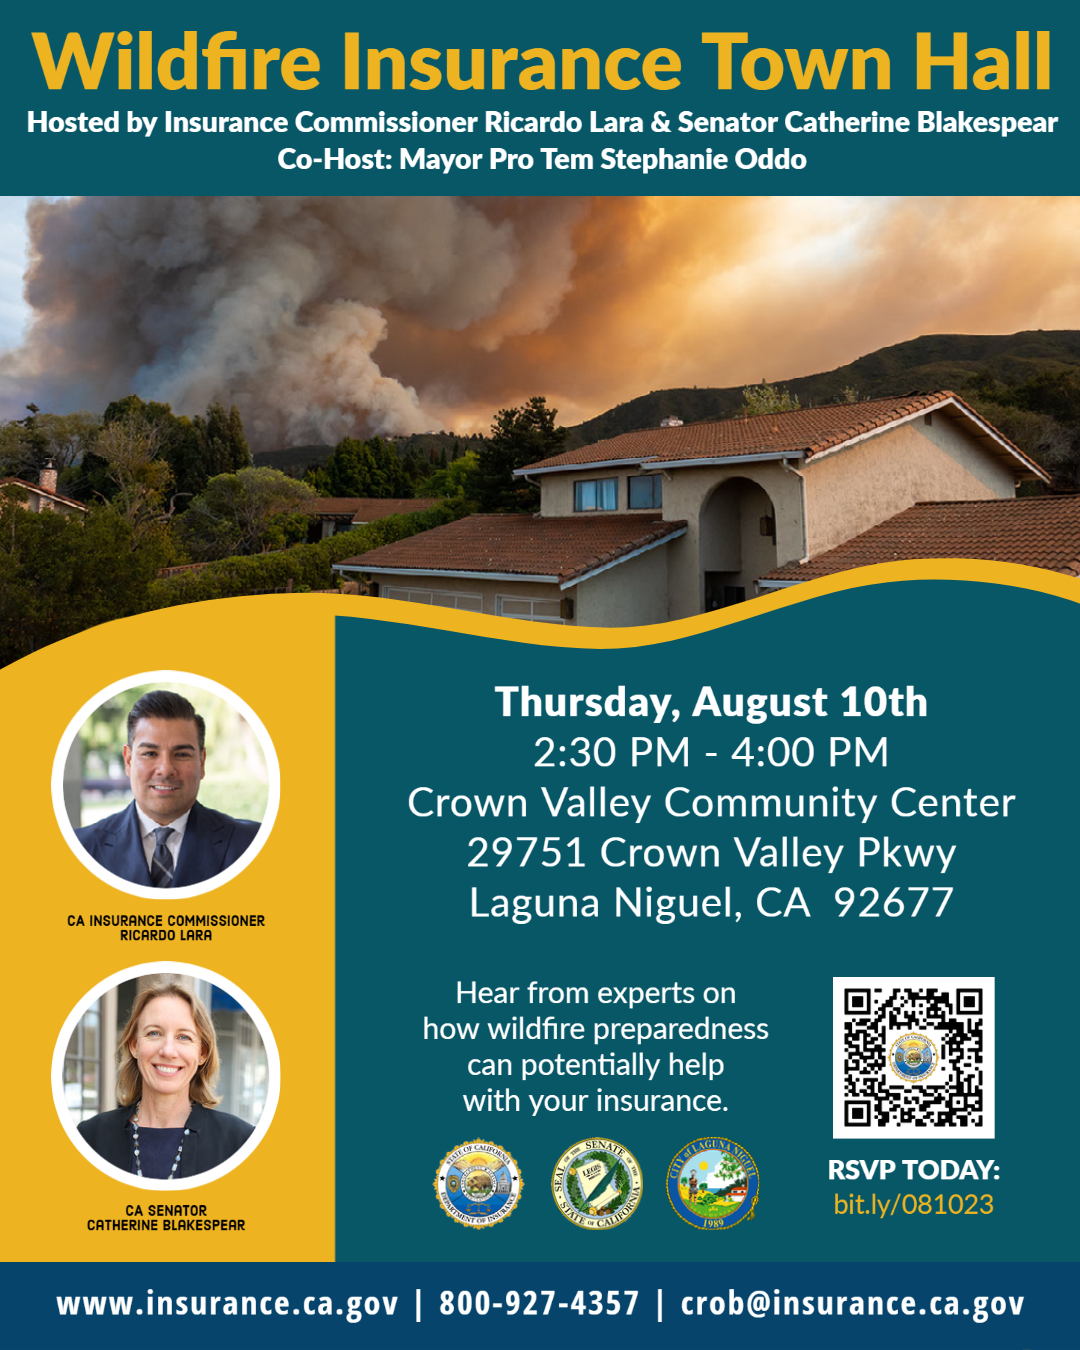 Wildfire Insurance Town Hall Hosted by Senator Blakespear and Mayor Pro Tem Oddo.
Thursday, August 10th at the Crown Valley Community Center.
Hear from experts on how wildfire preparedness can help with your insurance.